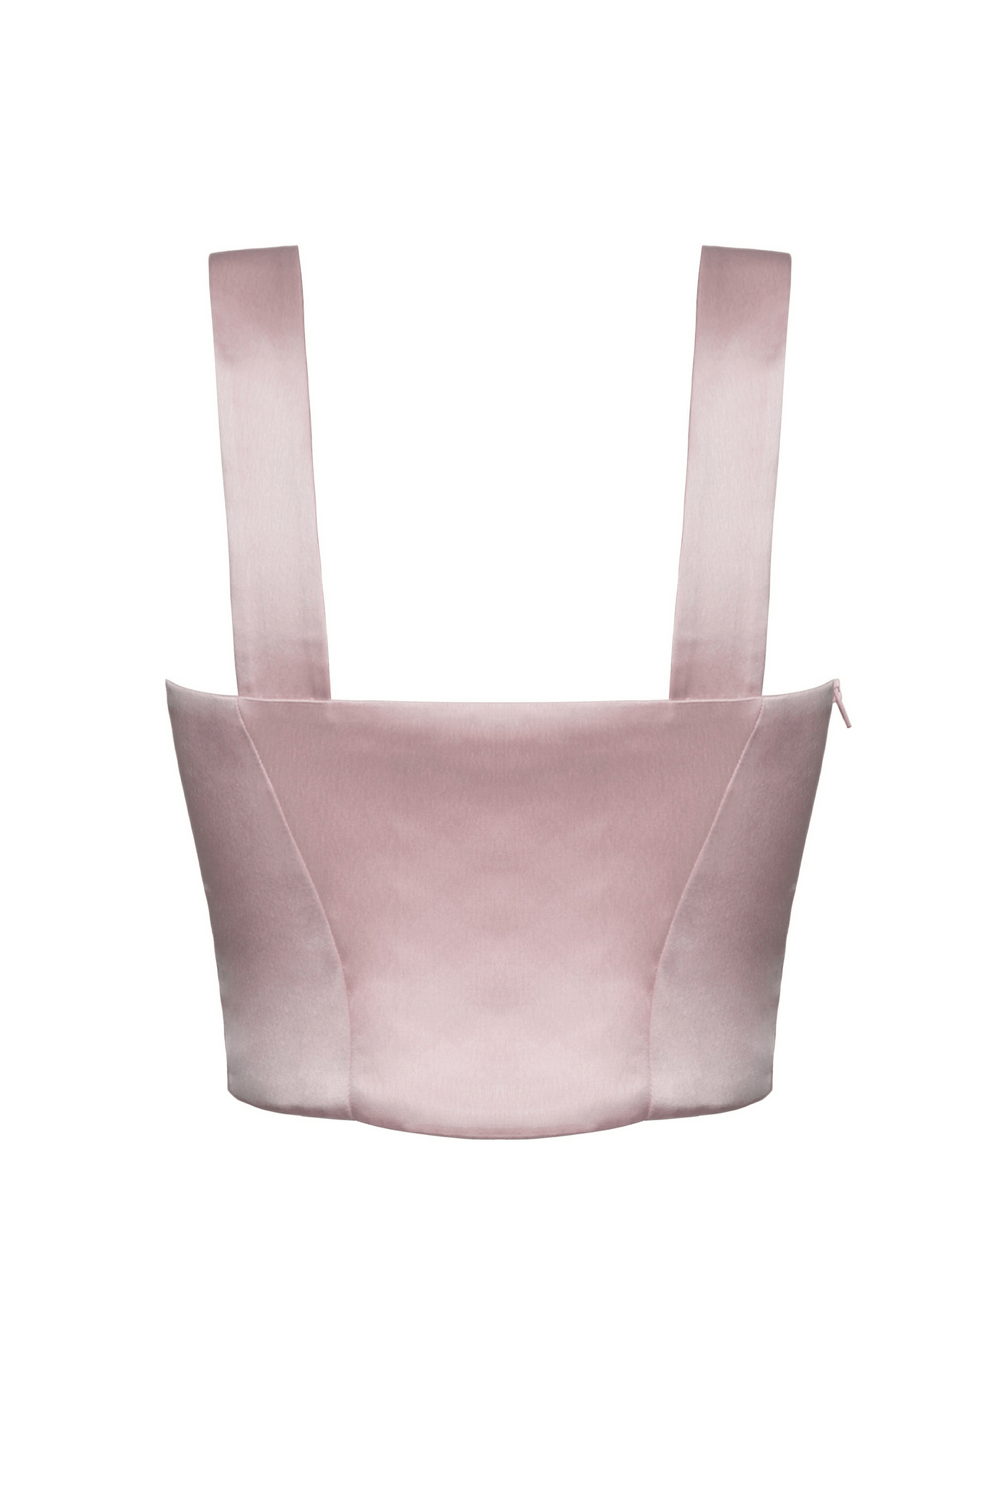 Pink Heart-Shaped Bustier Top with Webbings Detail